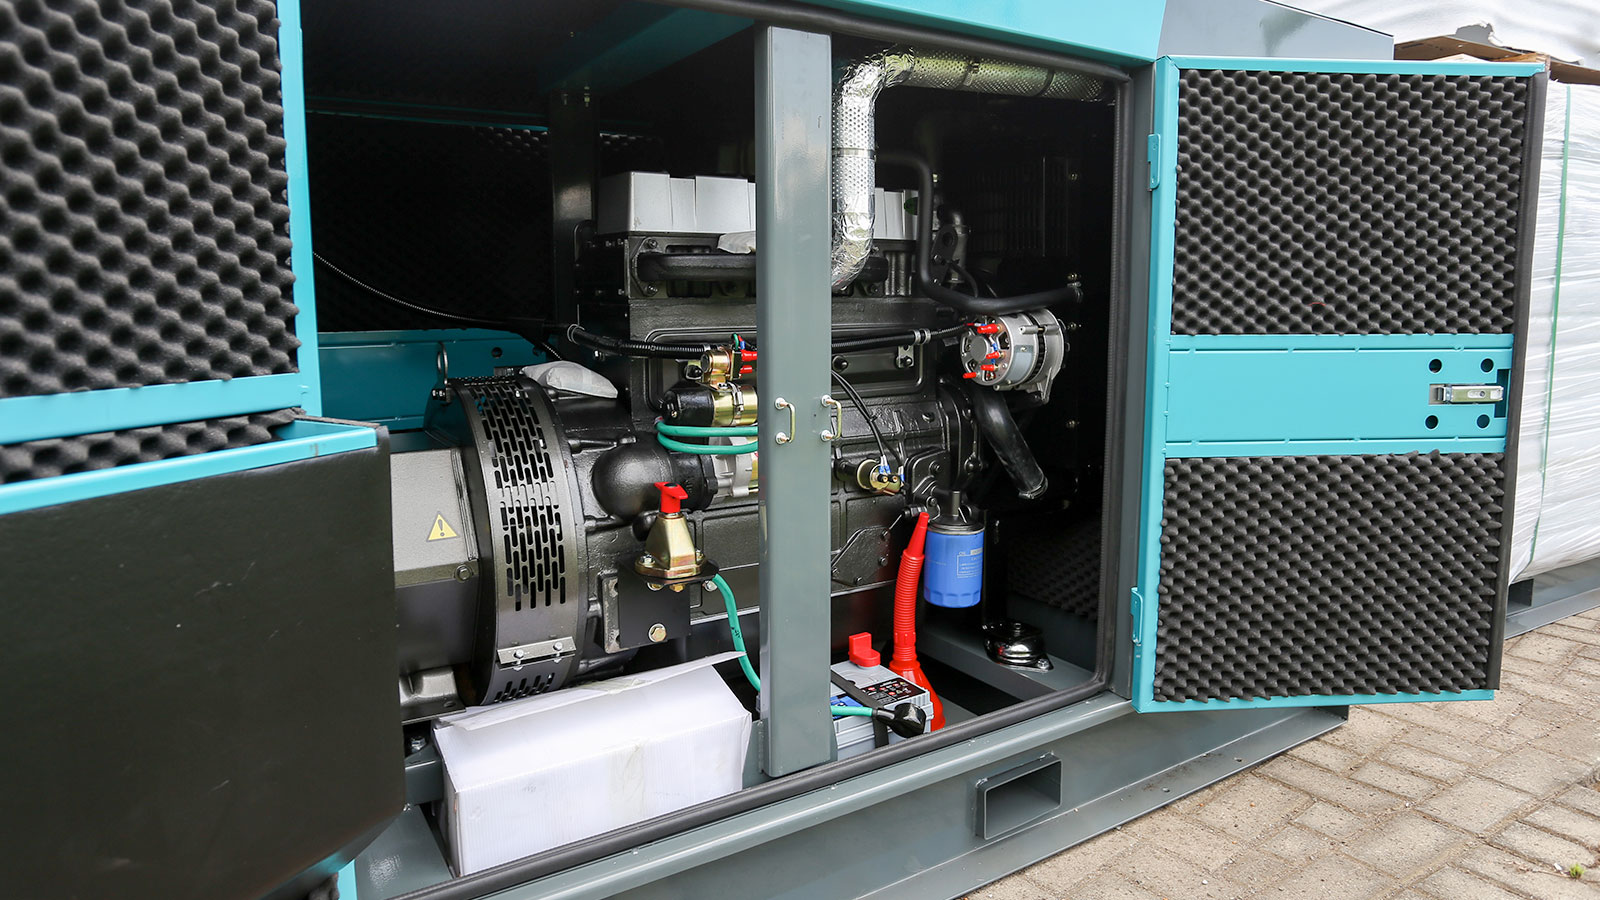 Andrew Keith, director of load bank manufacturer Power Prove, shares five key things to consider to ensure your diesel generator remains in tip-top condition.